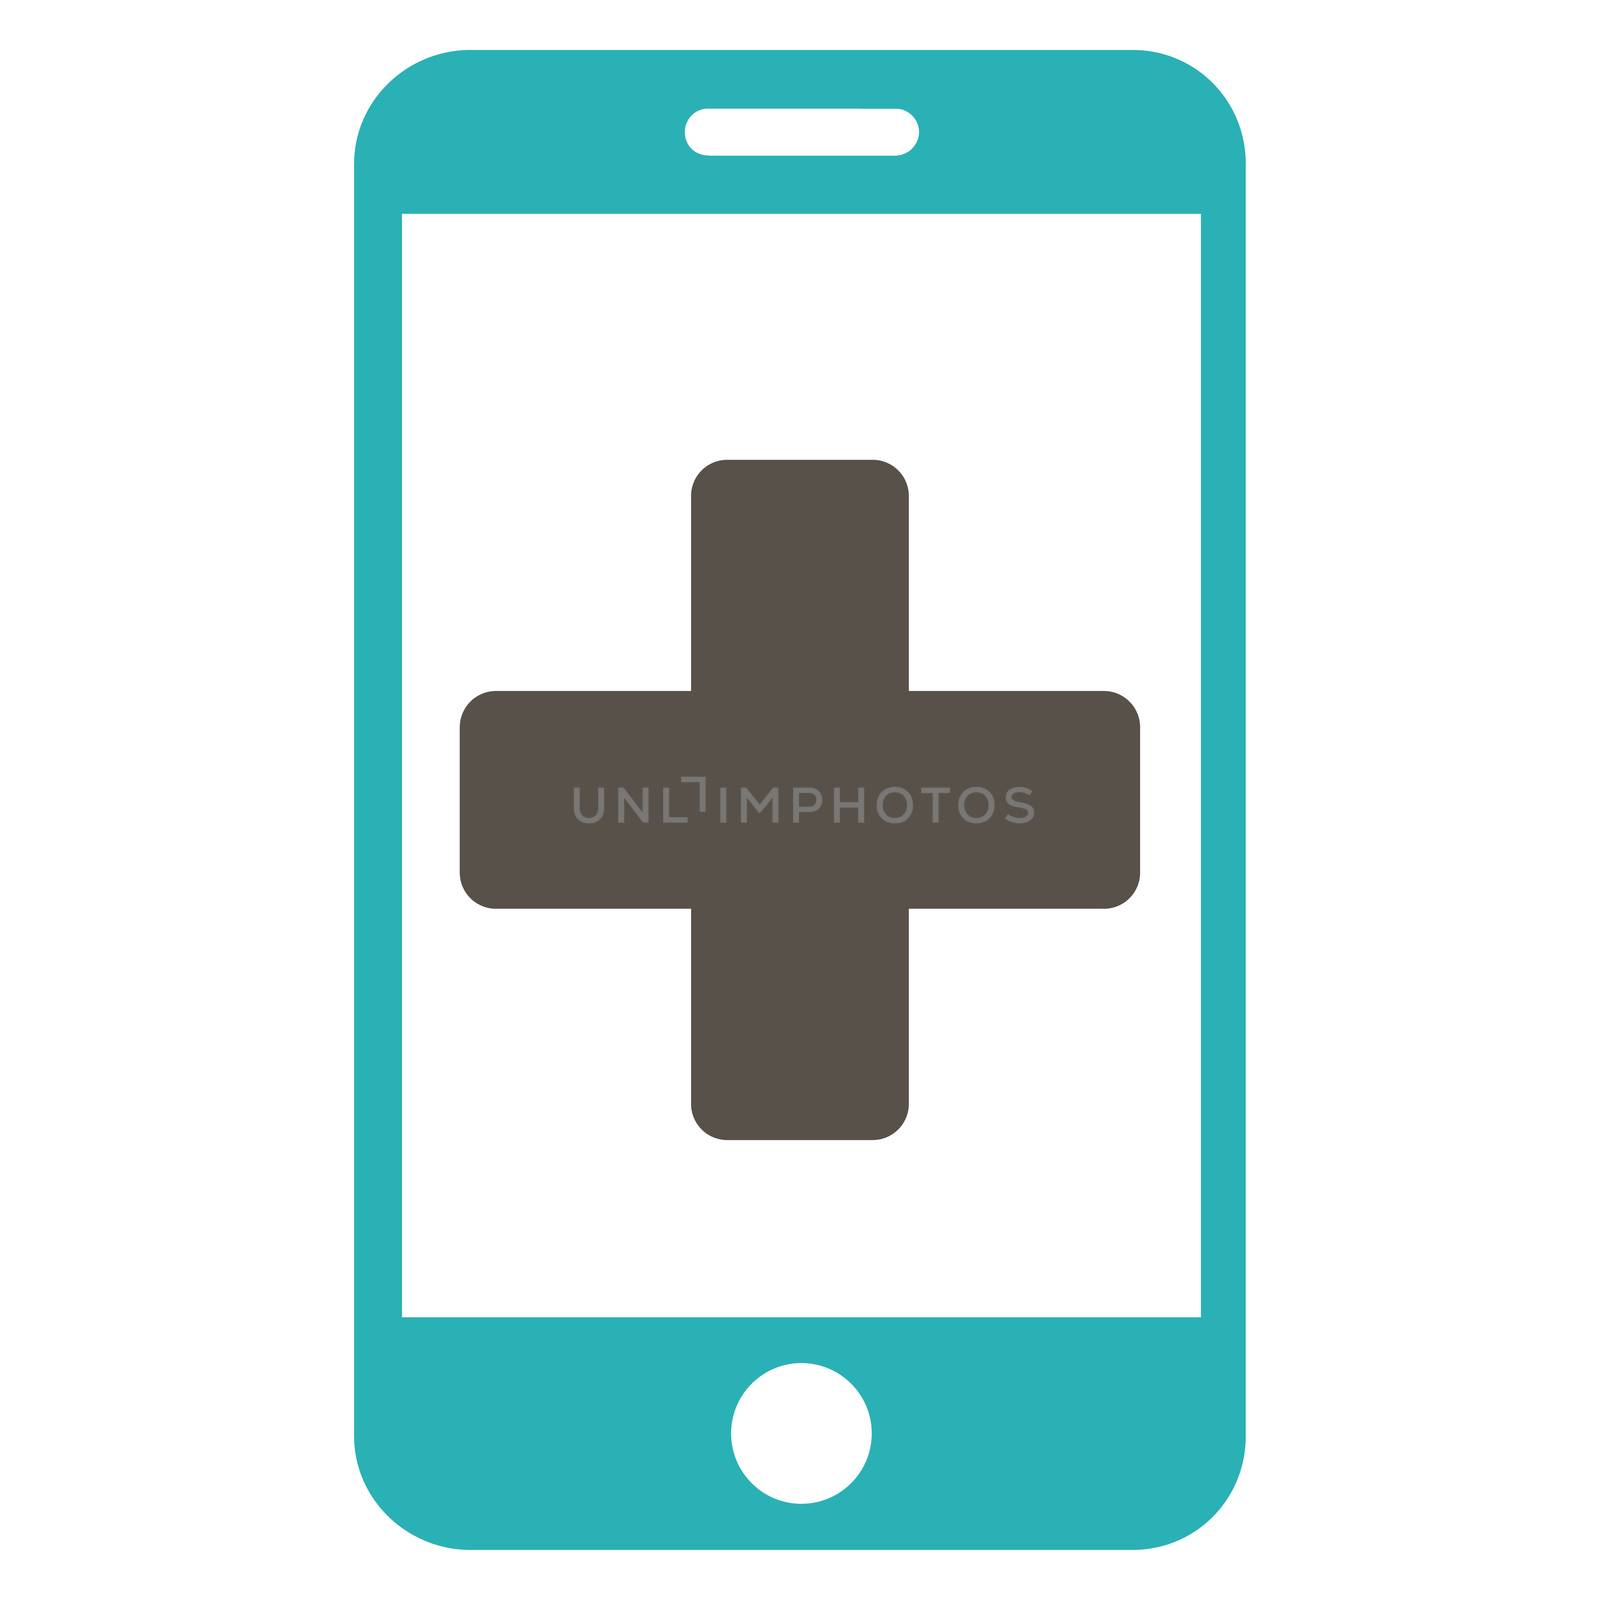 Online Help raster icon. Style is bicolor flat symbol, grey and cyan colors, rounded angles, white background.